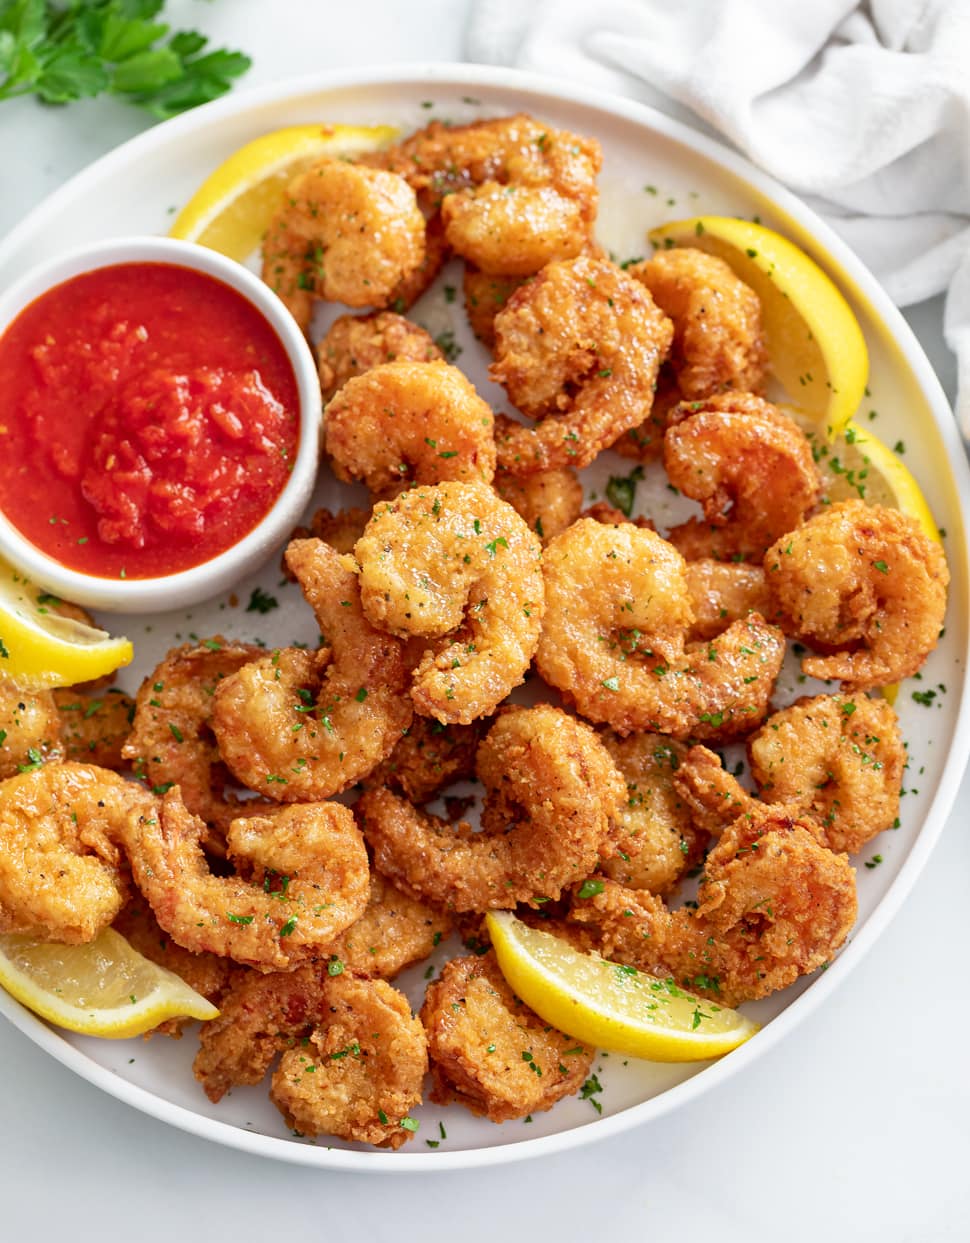 A pile of Fried Shrimp on a white plate with lemon slices and sauce.